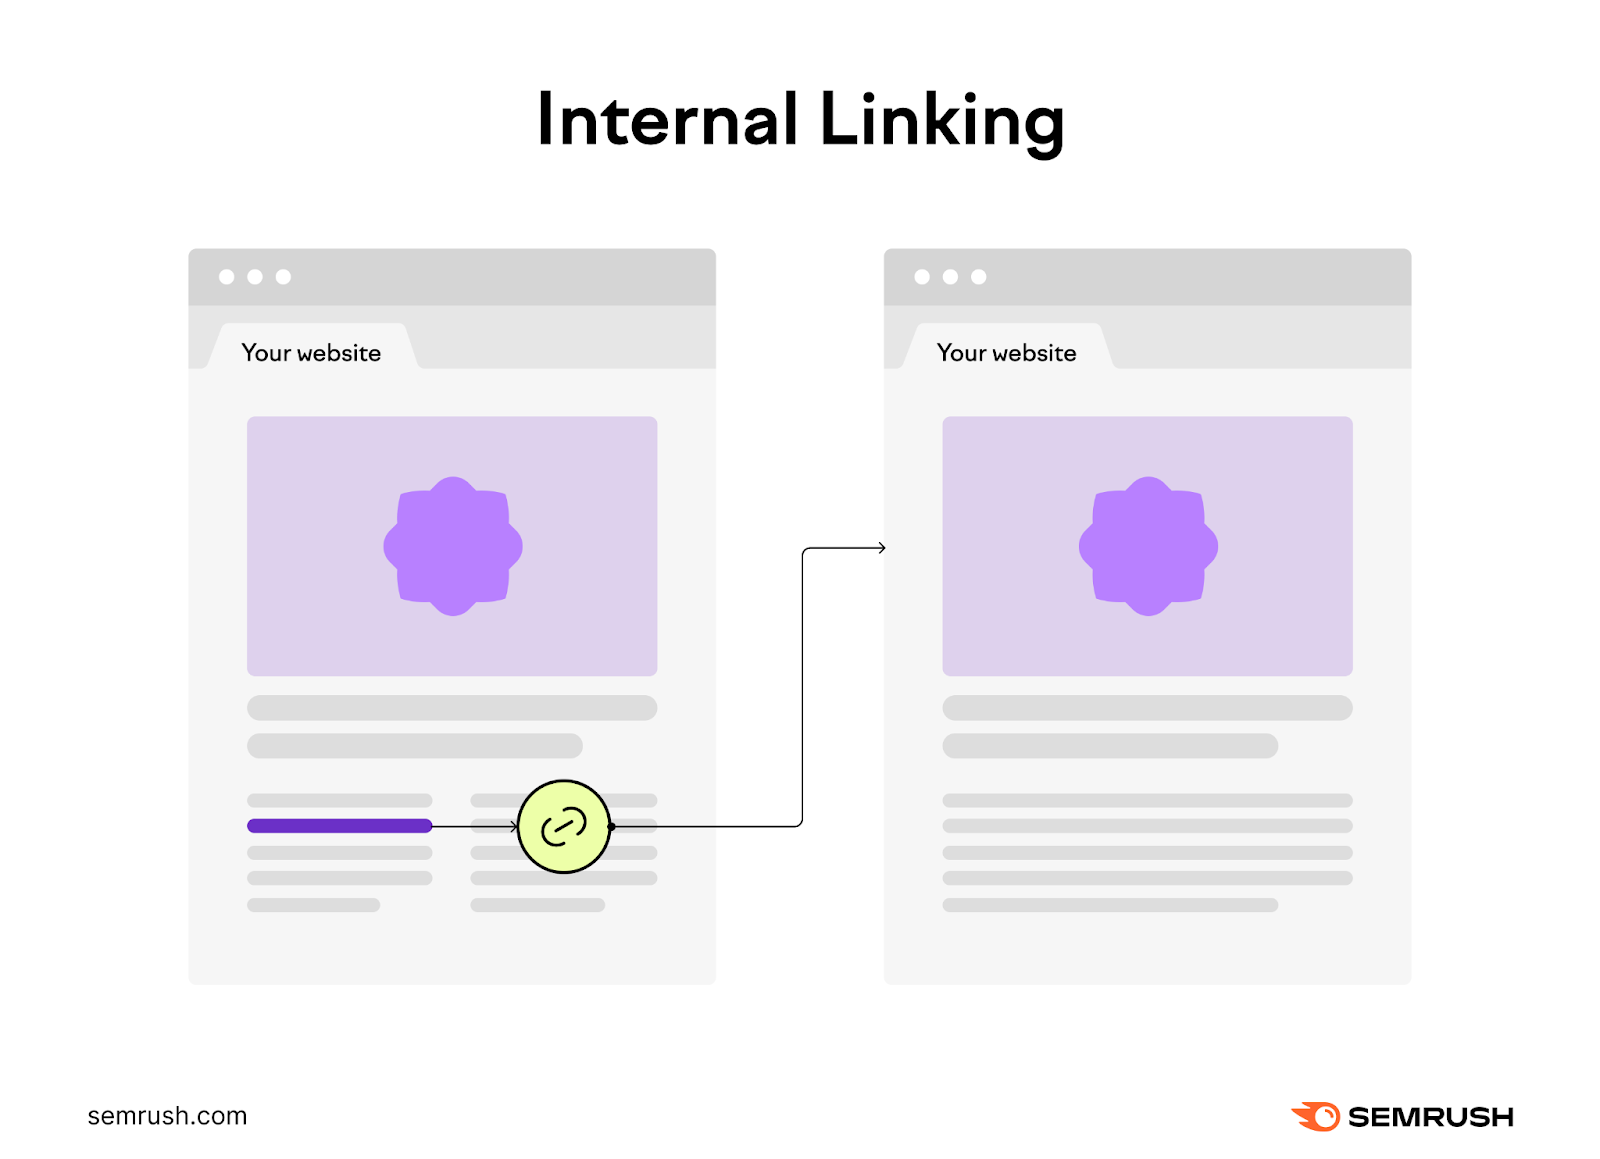 An infographic showing two pages of the same website, where the first page (left) has an internal link to the second page (right)